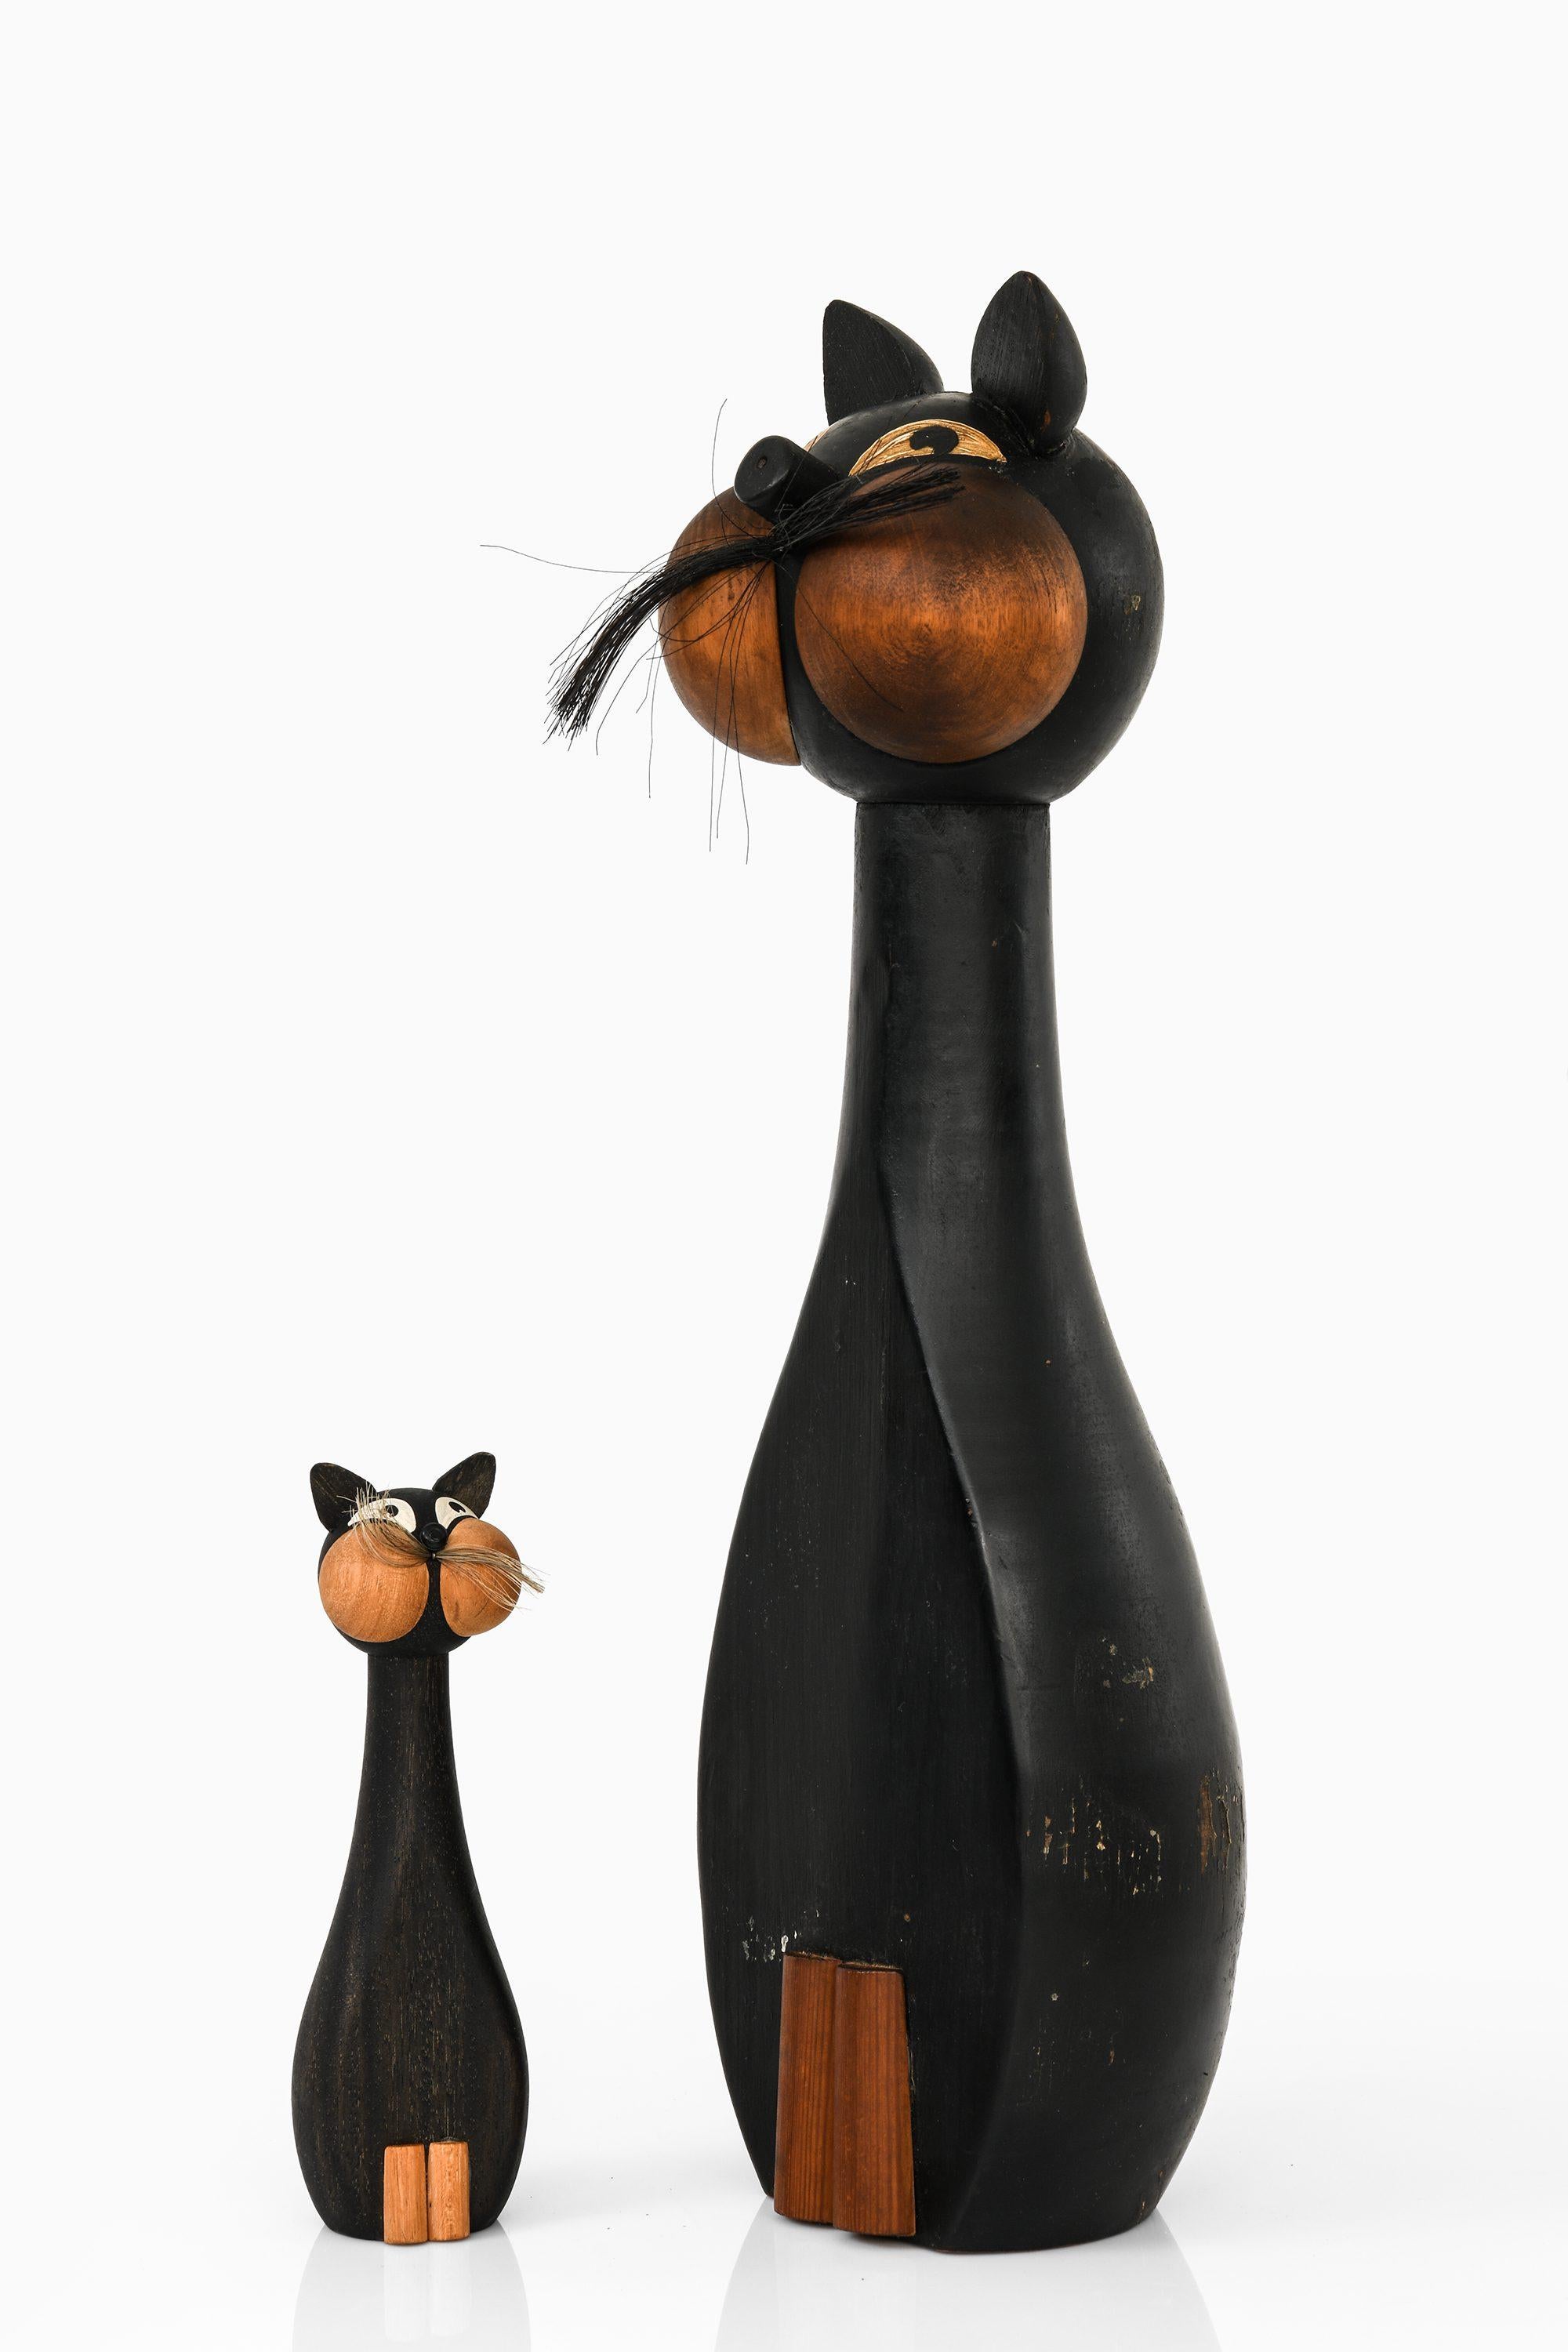 Pair of Cats in Black Lacquered Wood by Laurids Lønborg, 1960's

Additional Information:
Material: Black lacquered wood
Style: Mid century, Scandinavian
Produced in Denmark
Dimensions (W x D x H): 17.5 x 14 x 58 cm
Dimensions (W x D x H): 7 x 6 x 23